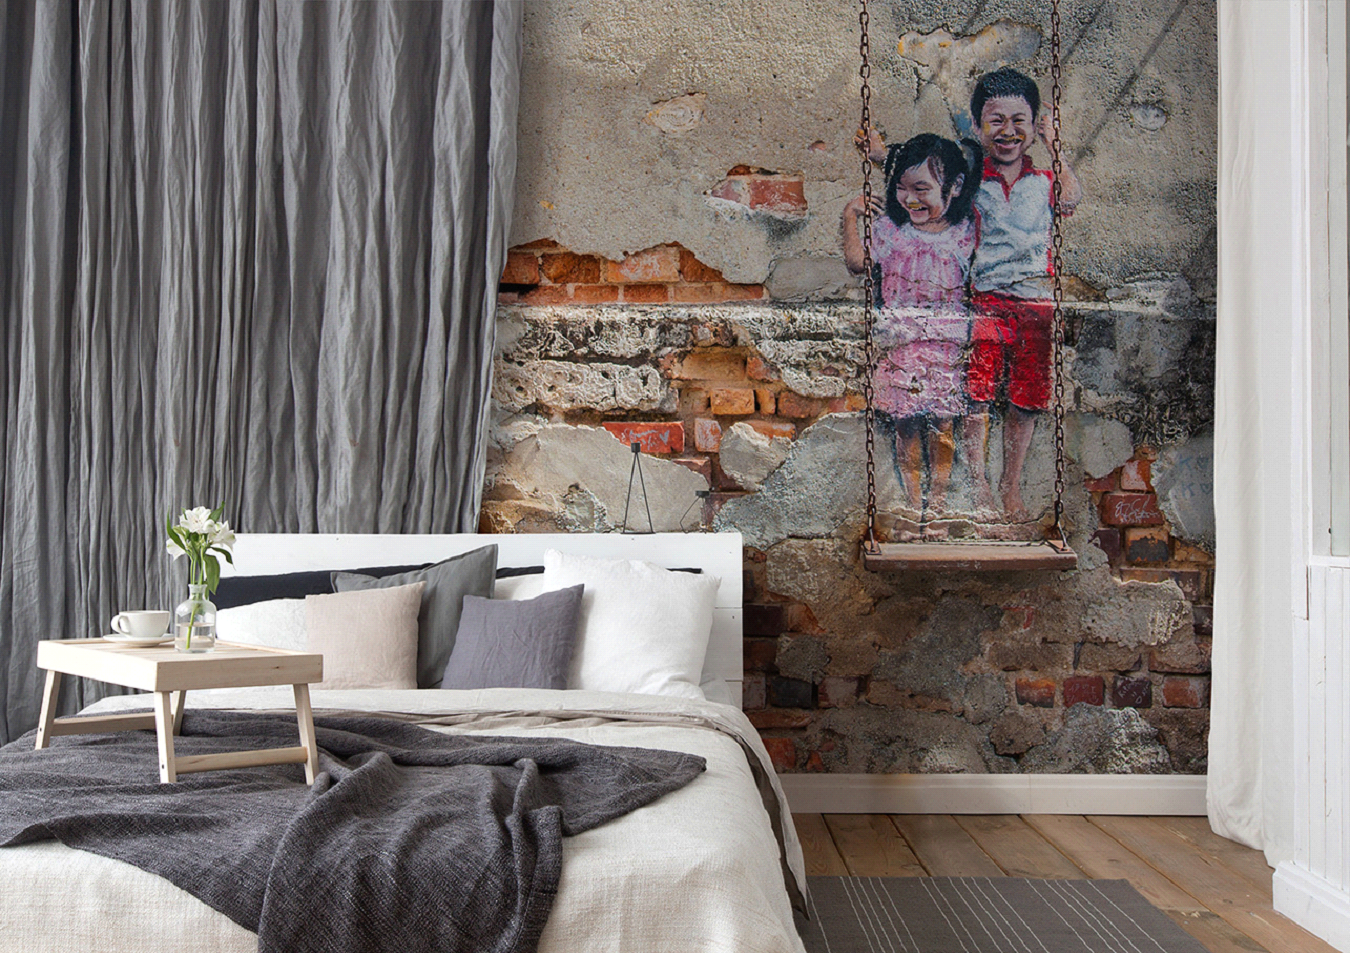 Home decor street style 4 Street art at home? You can count us in! - 11 your children's bedroom